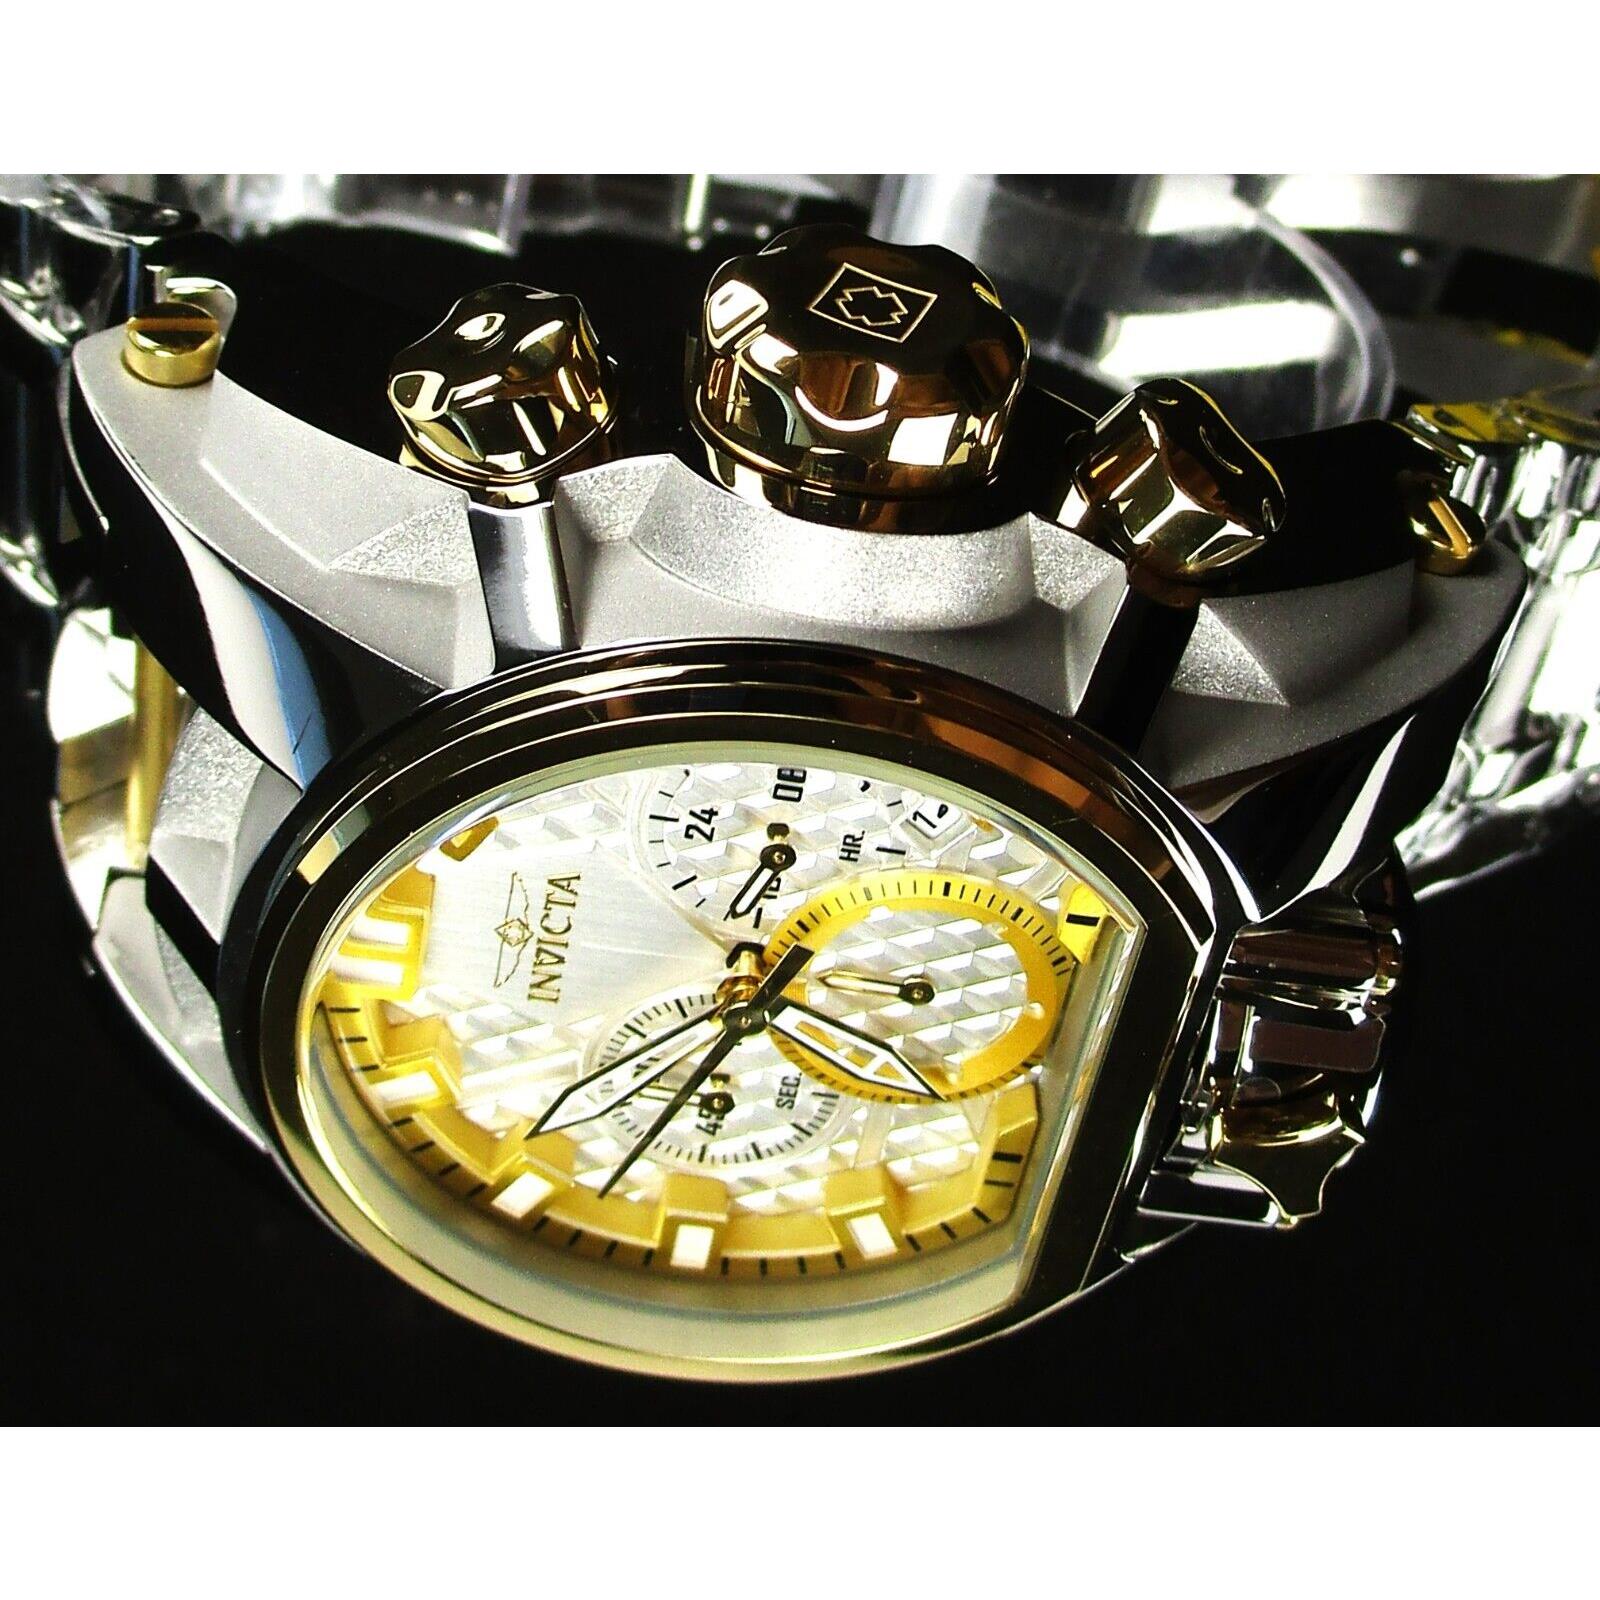 Invicta watch  - Silver w/Gold Tone Accents Dial, Polished Stainless Steel Band, Steel & Gold Tone Bezel